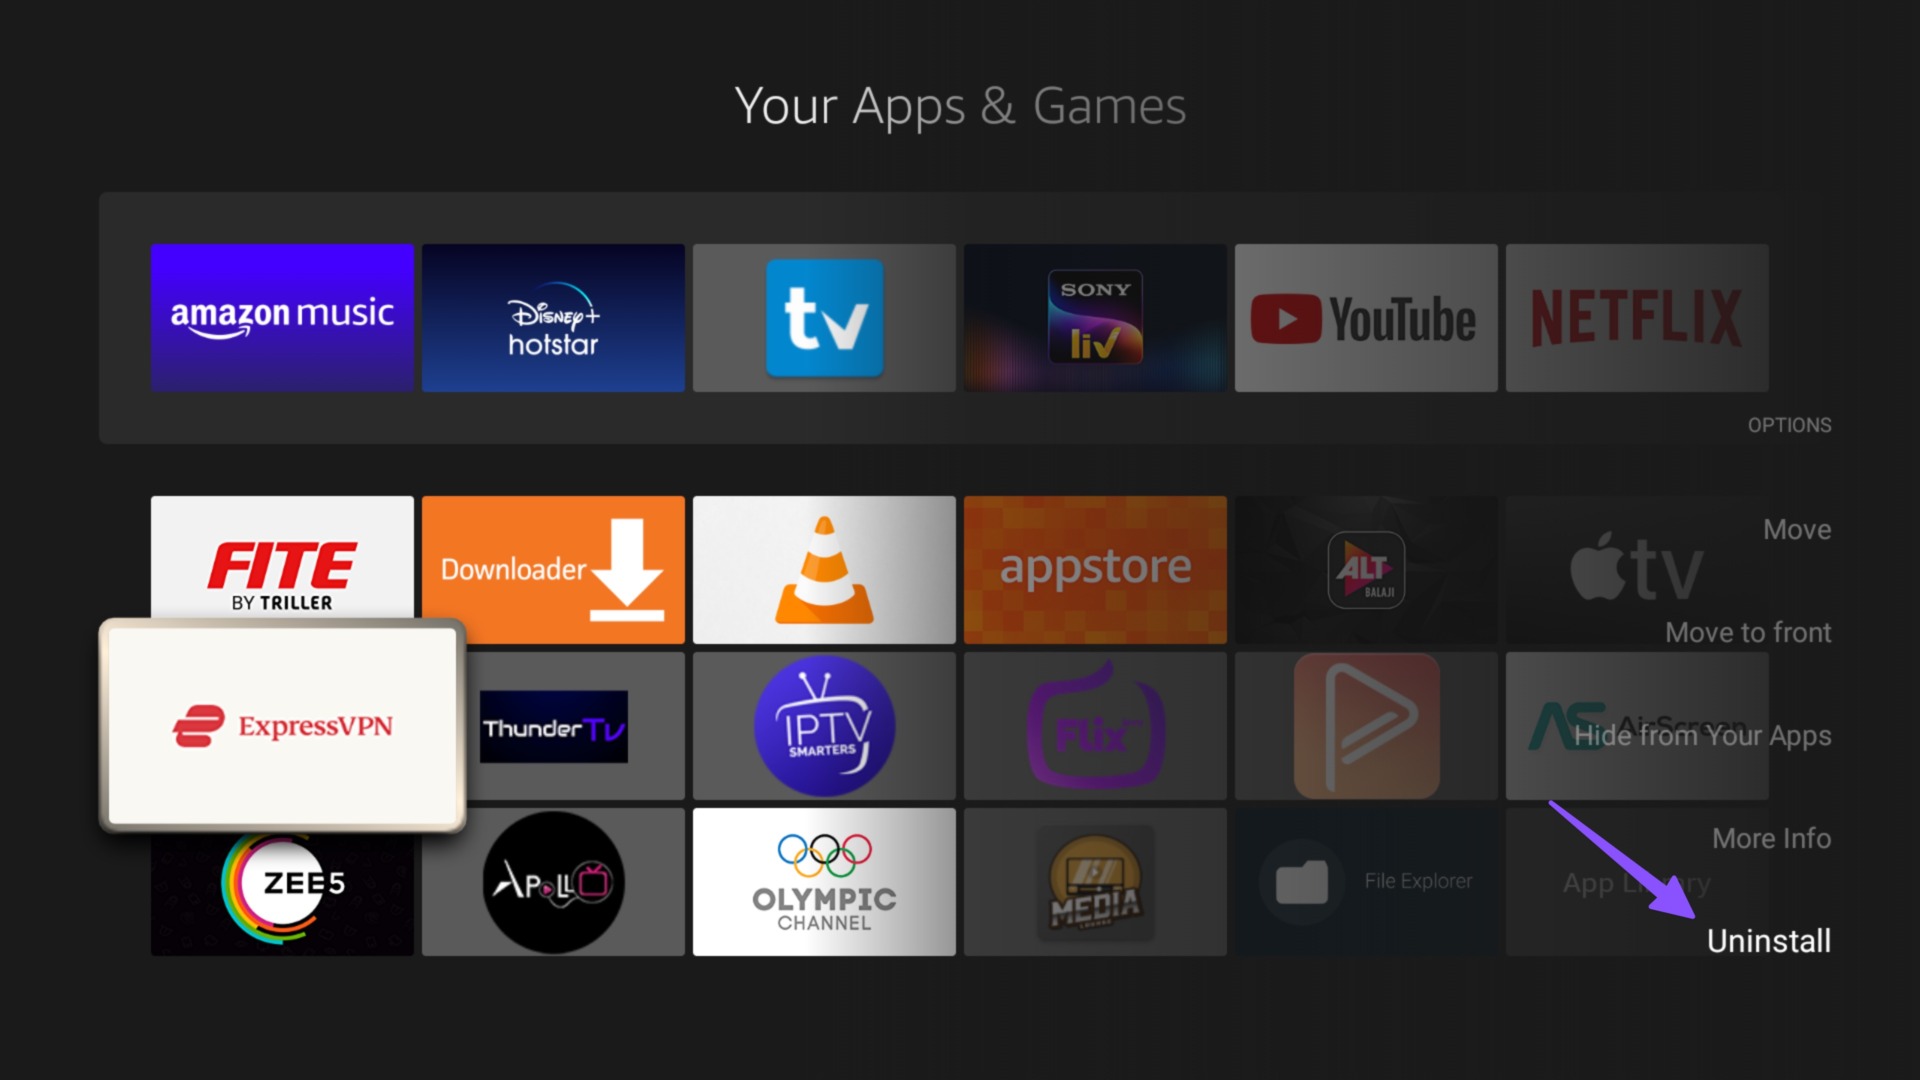 Uninstall apps on Fire TV Stick